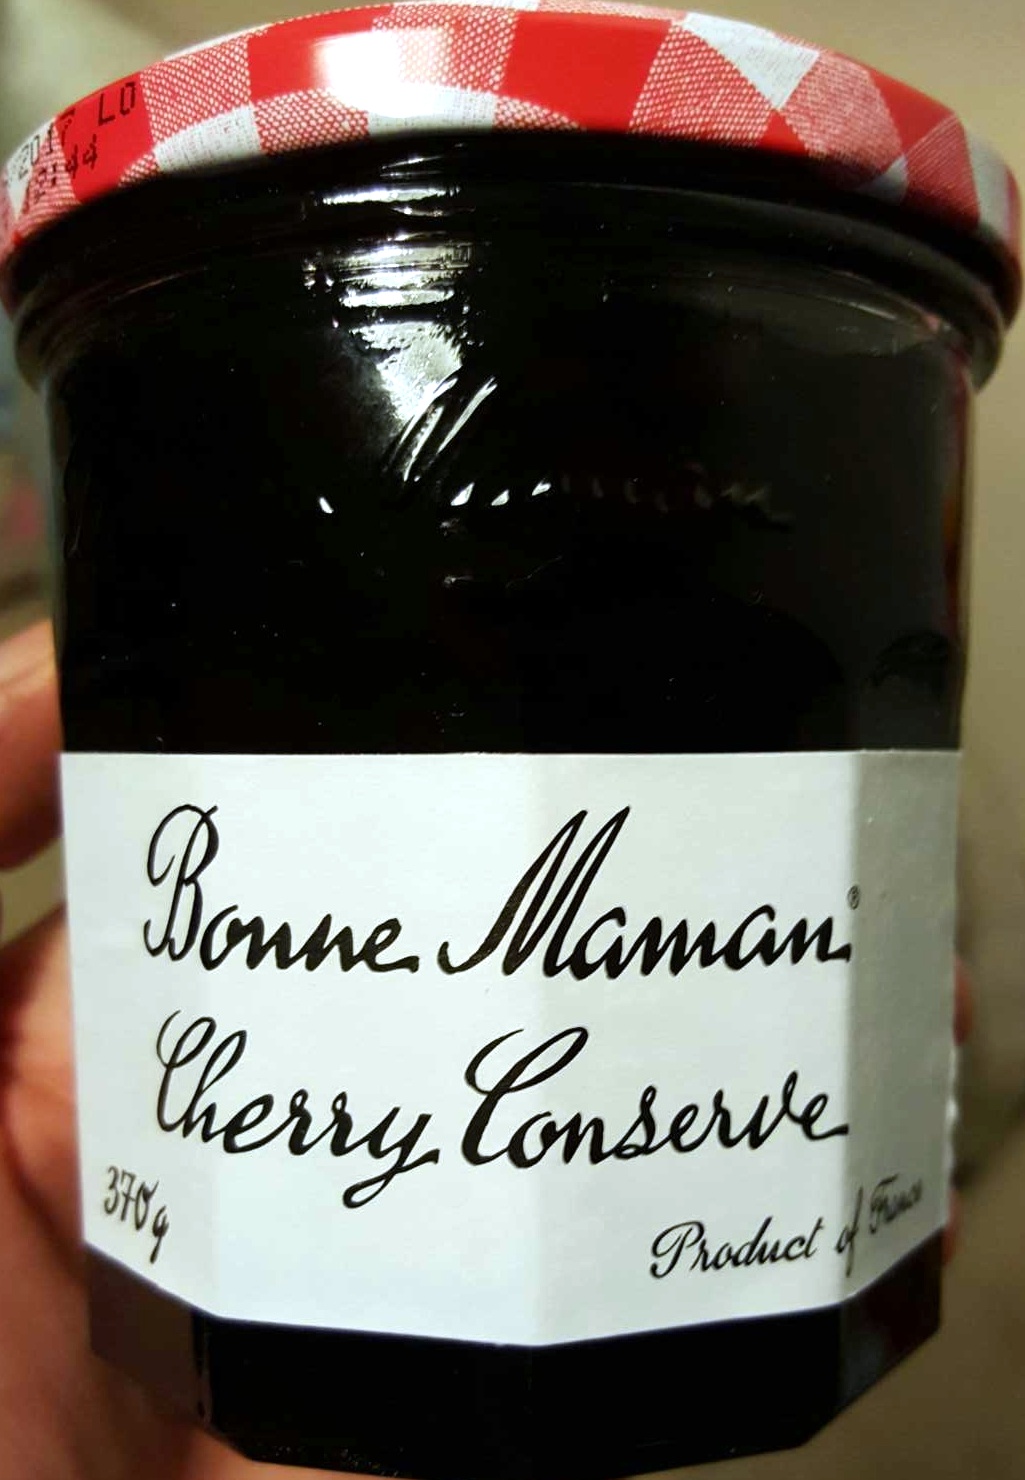 Cherry conserve - Product